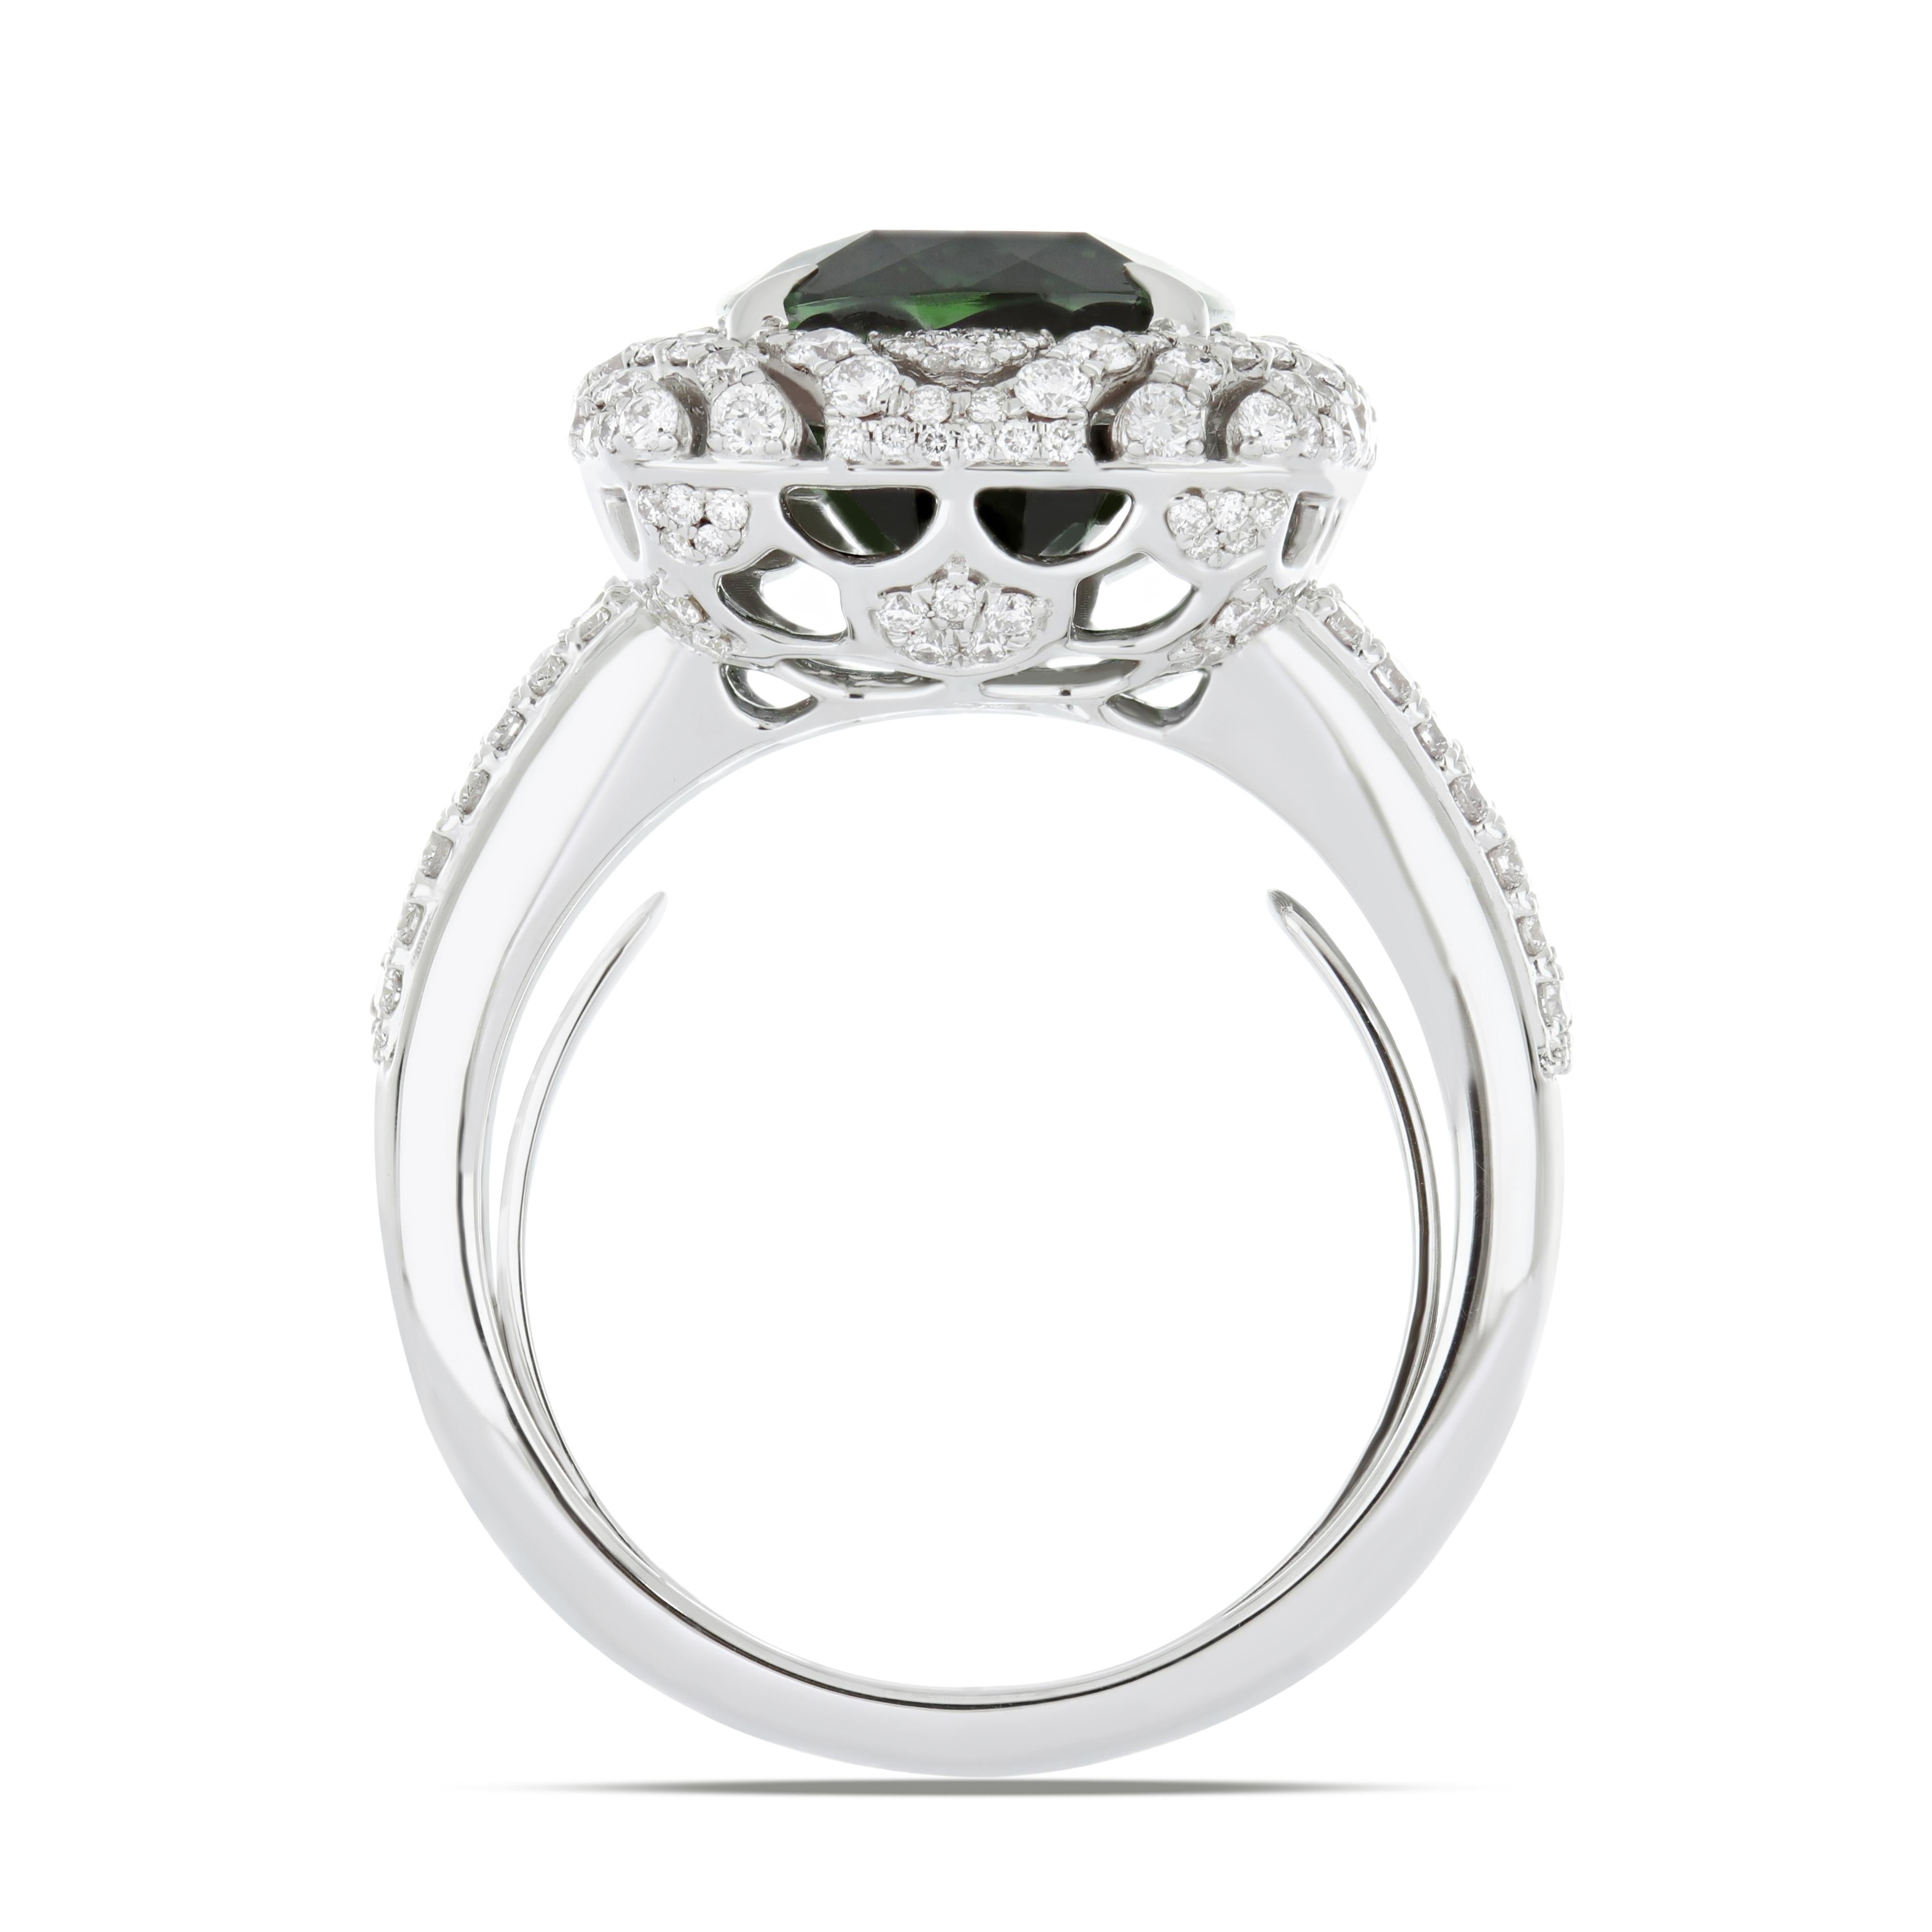 Women's 8.7 Carat Green Tourmaline and Diamond Studded Ring in 18K White Gold For Sale